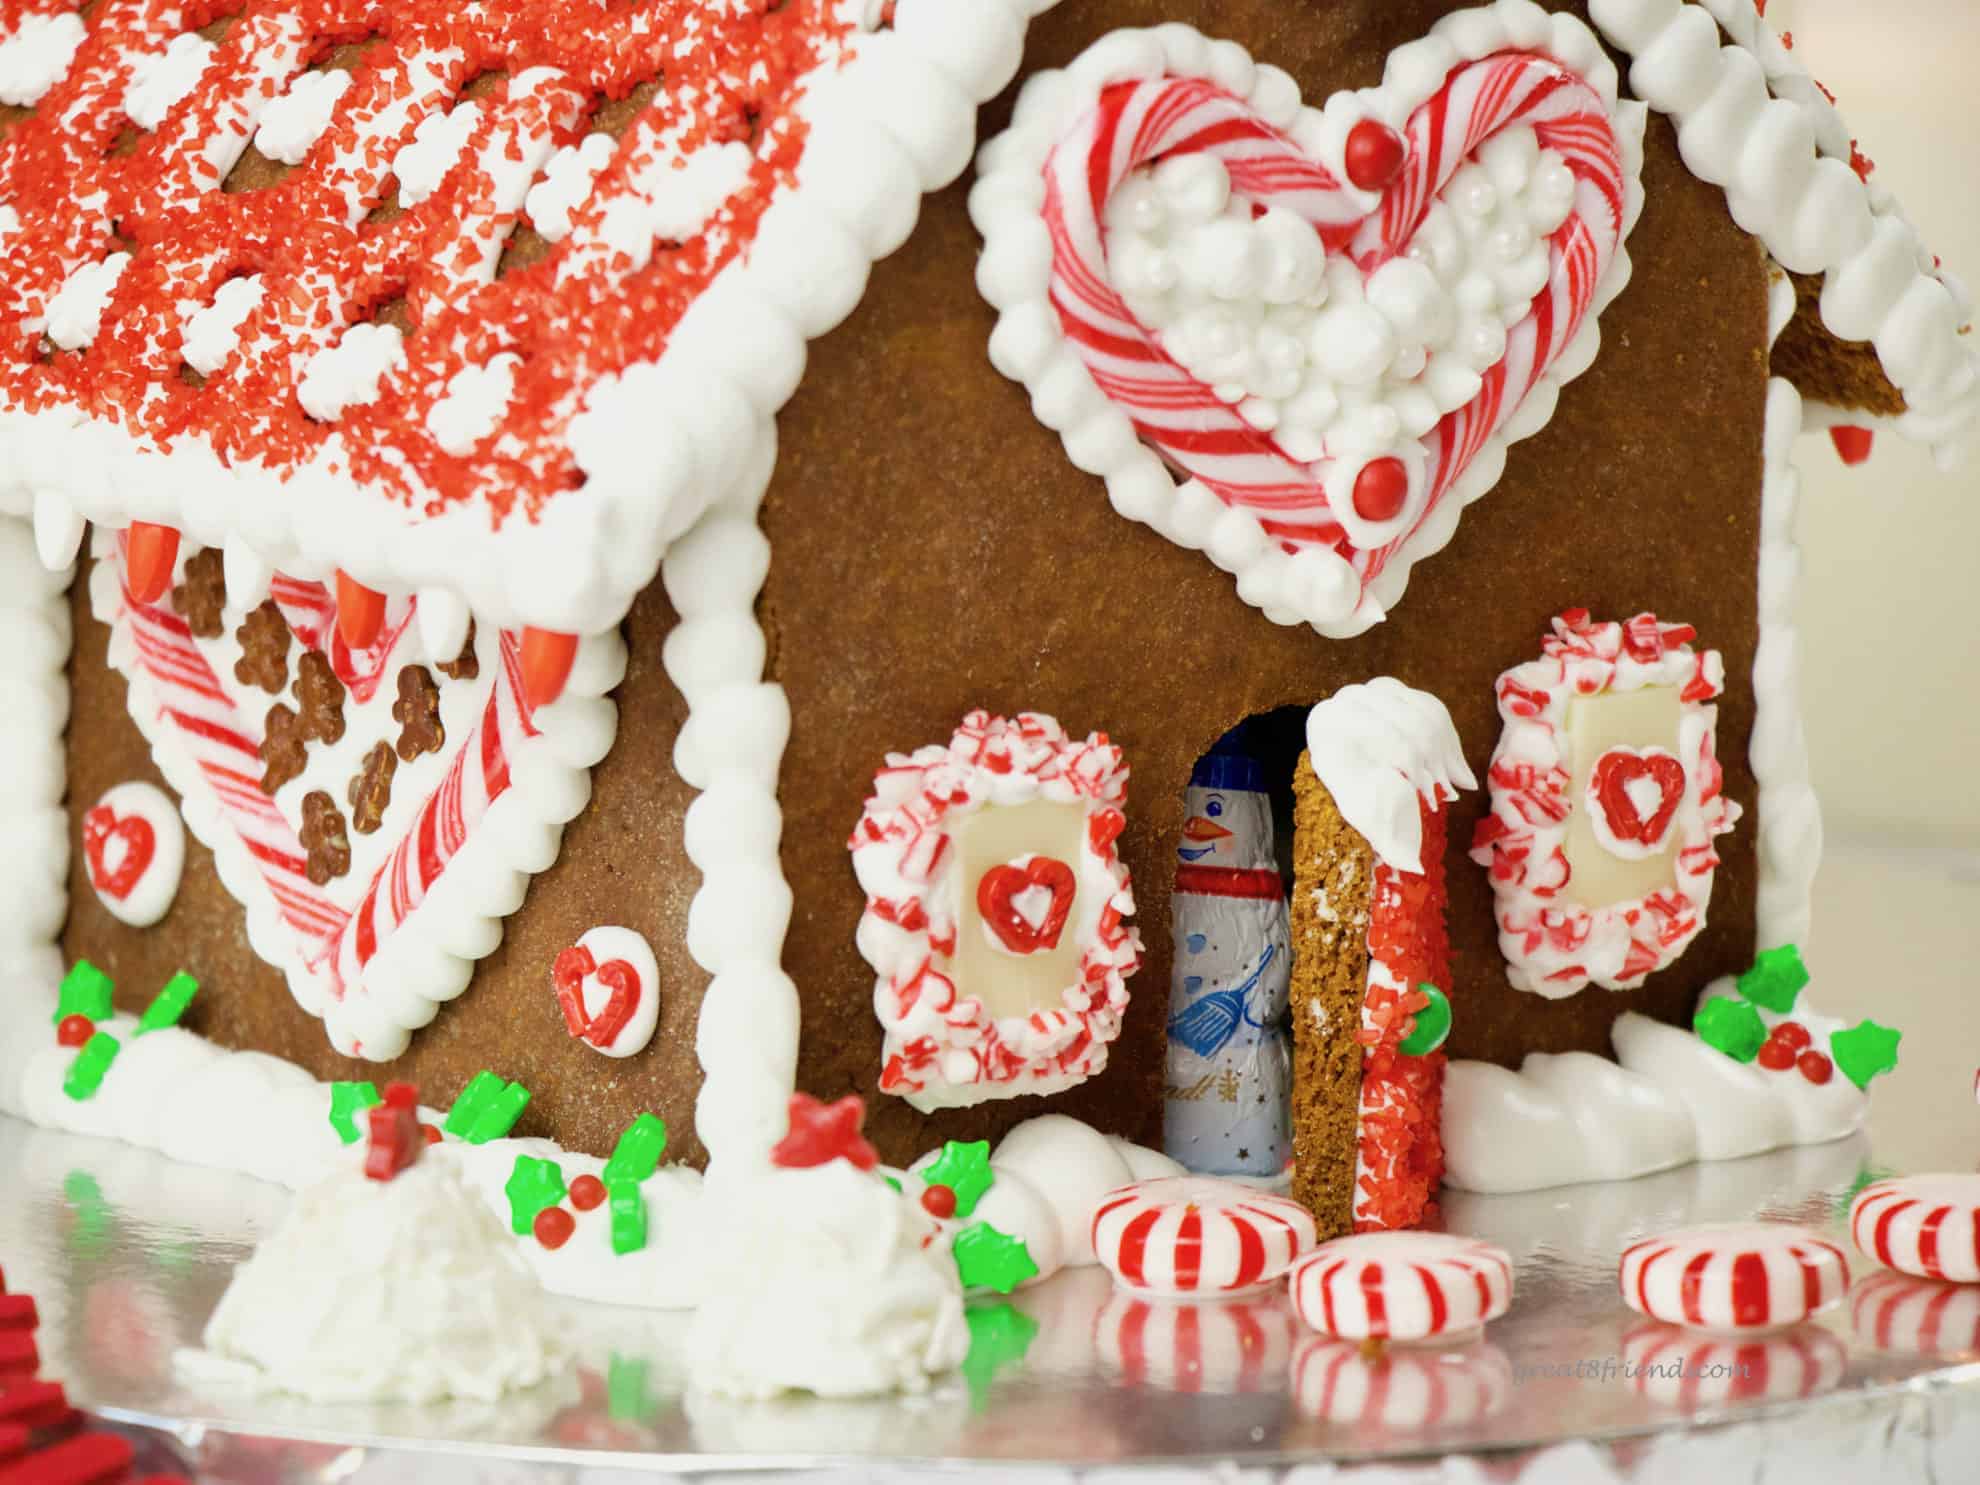 This festive Gingerbread House is a fun craft for your friends and family. Make this DIY edible Christmas decoration and delight the kids in your life.